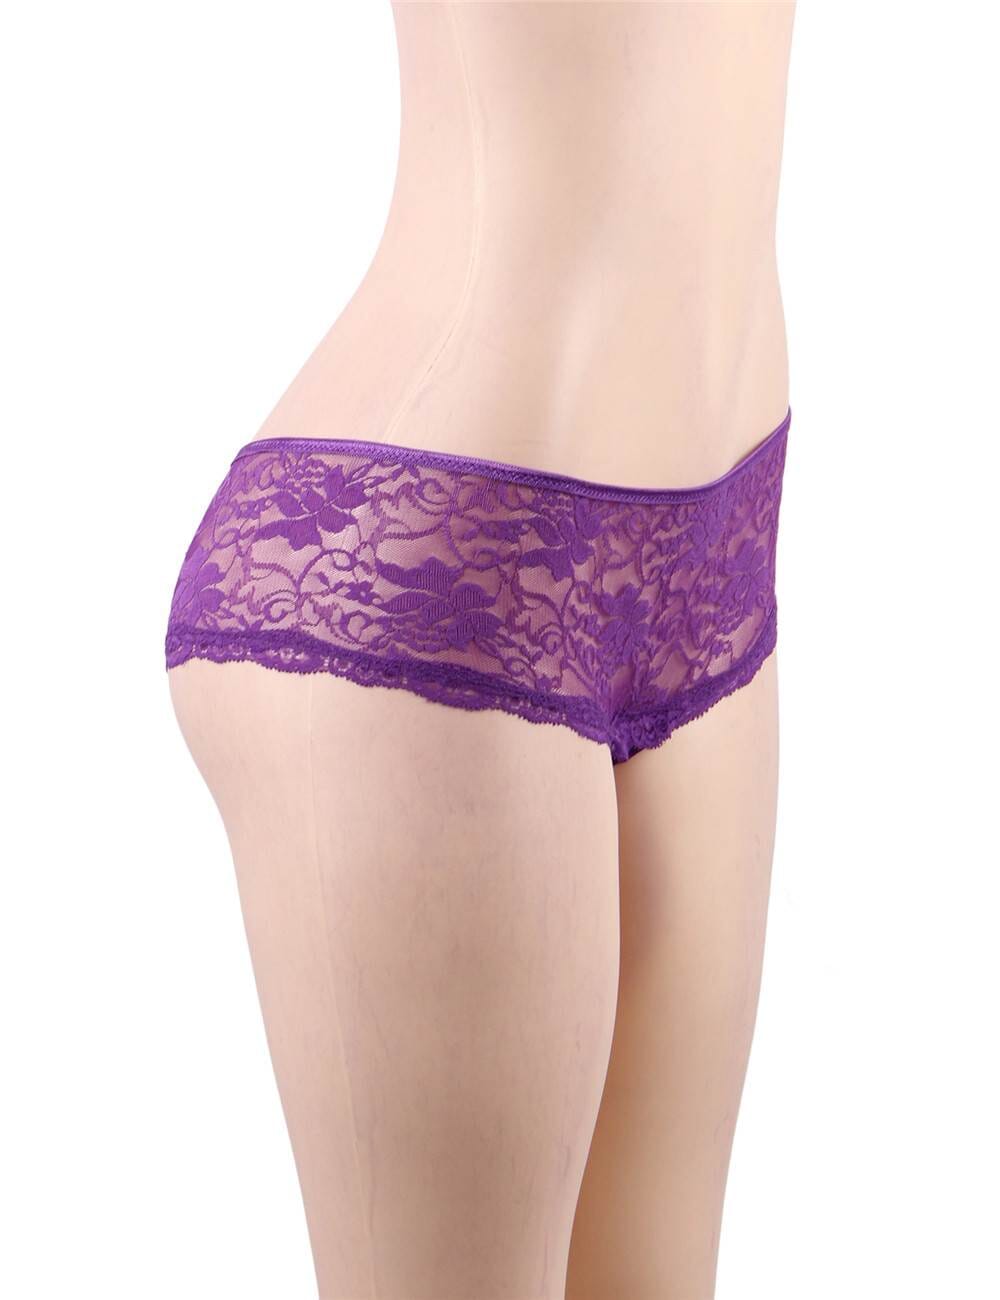 a woman's panties with a purple lace